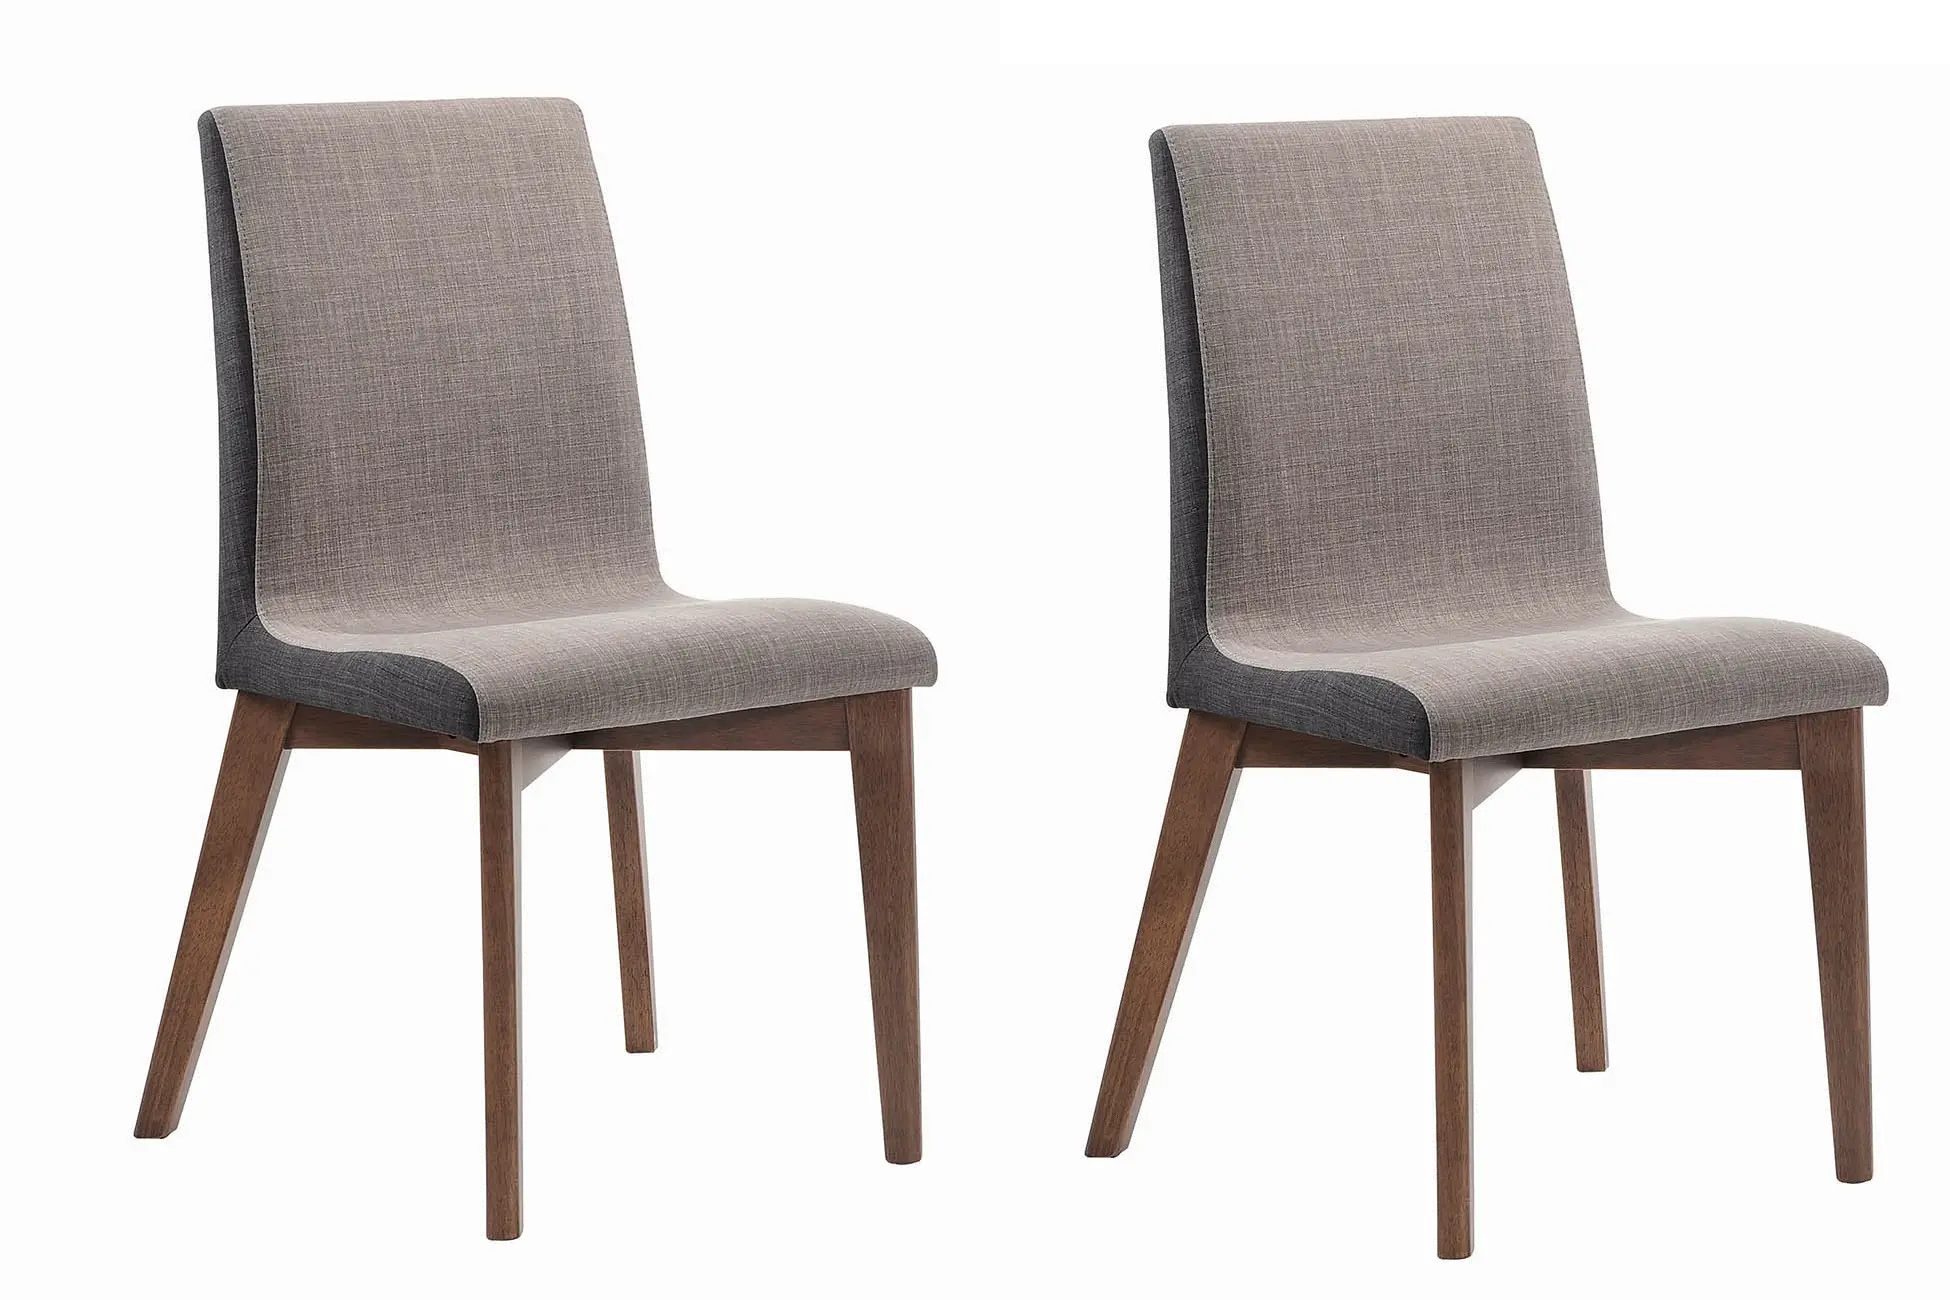 Contemporary Gray and Walnut Dining Room Chair (Set of 2) - Baylor